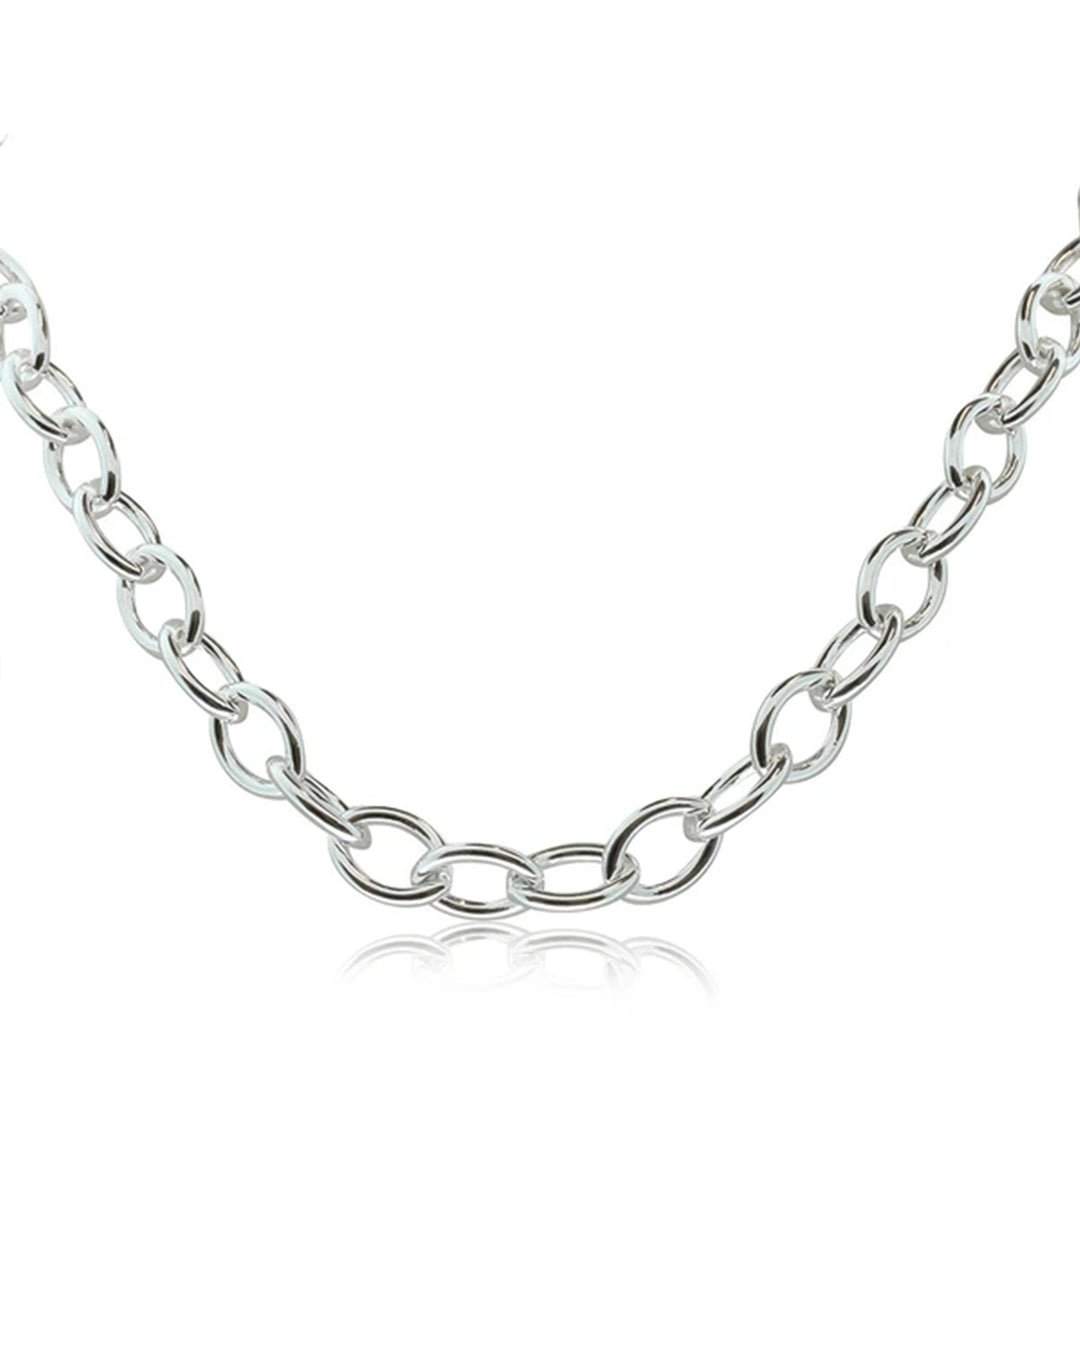 Custom Sterling Silver 3mm Trace Chain - The Healing Pear